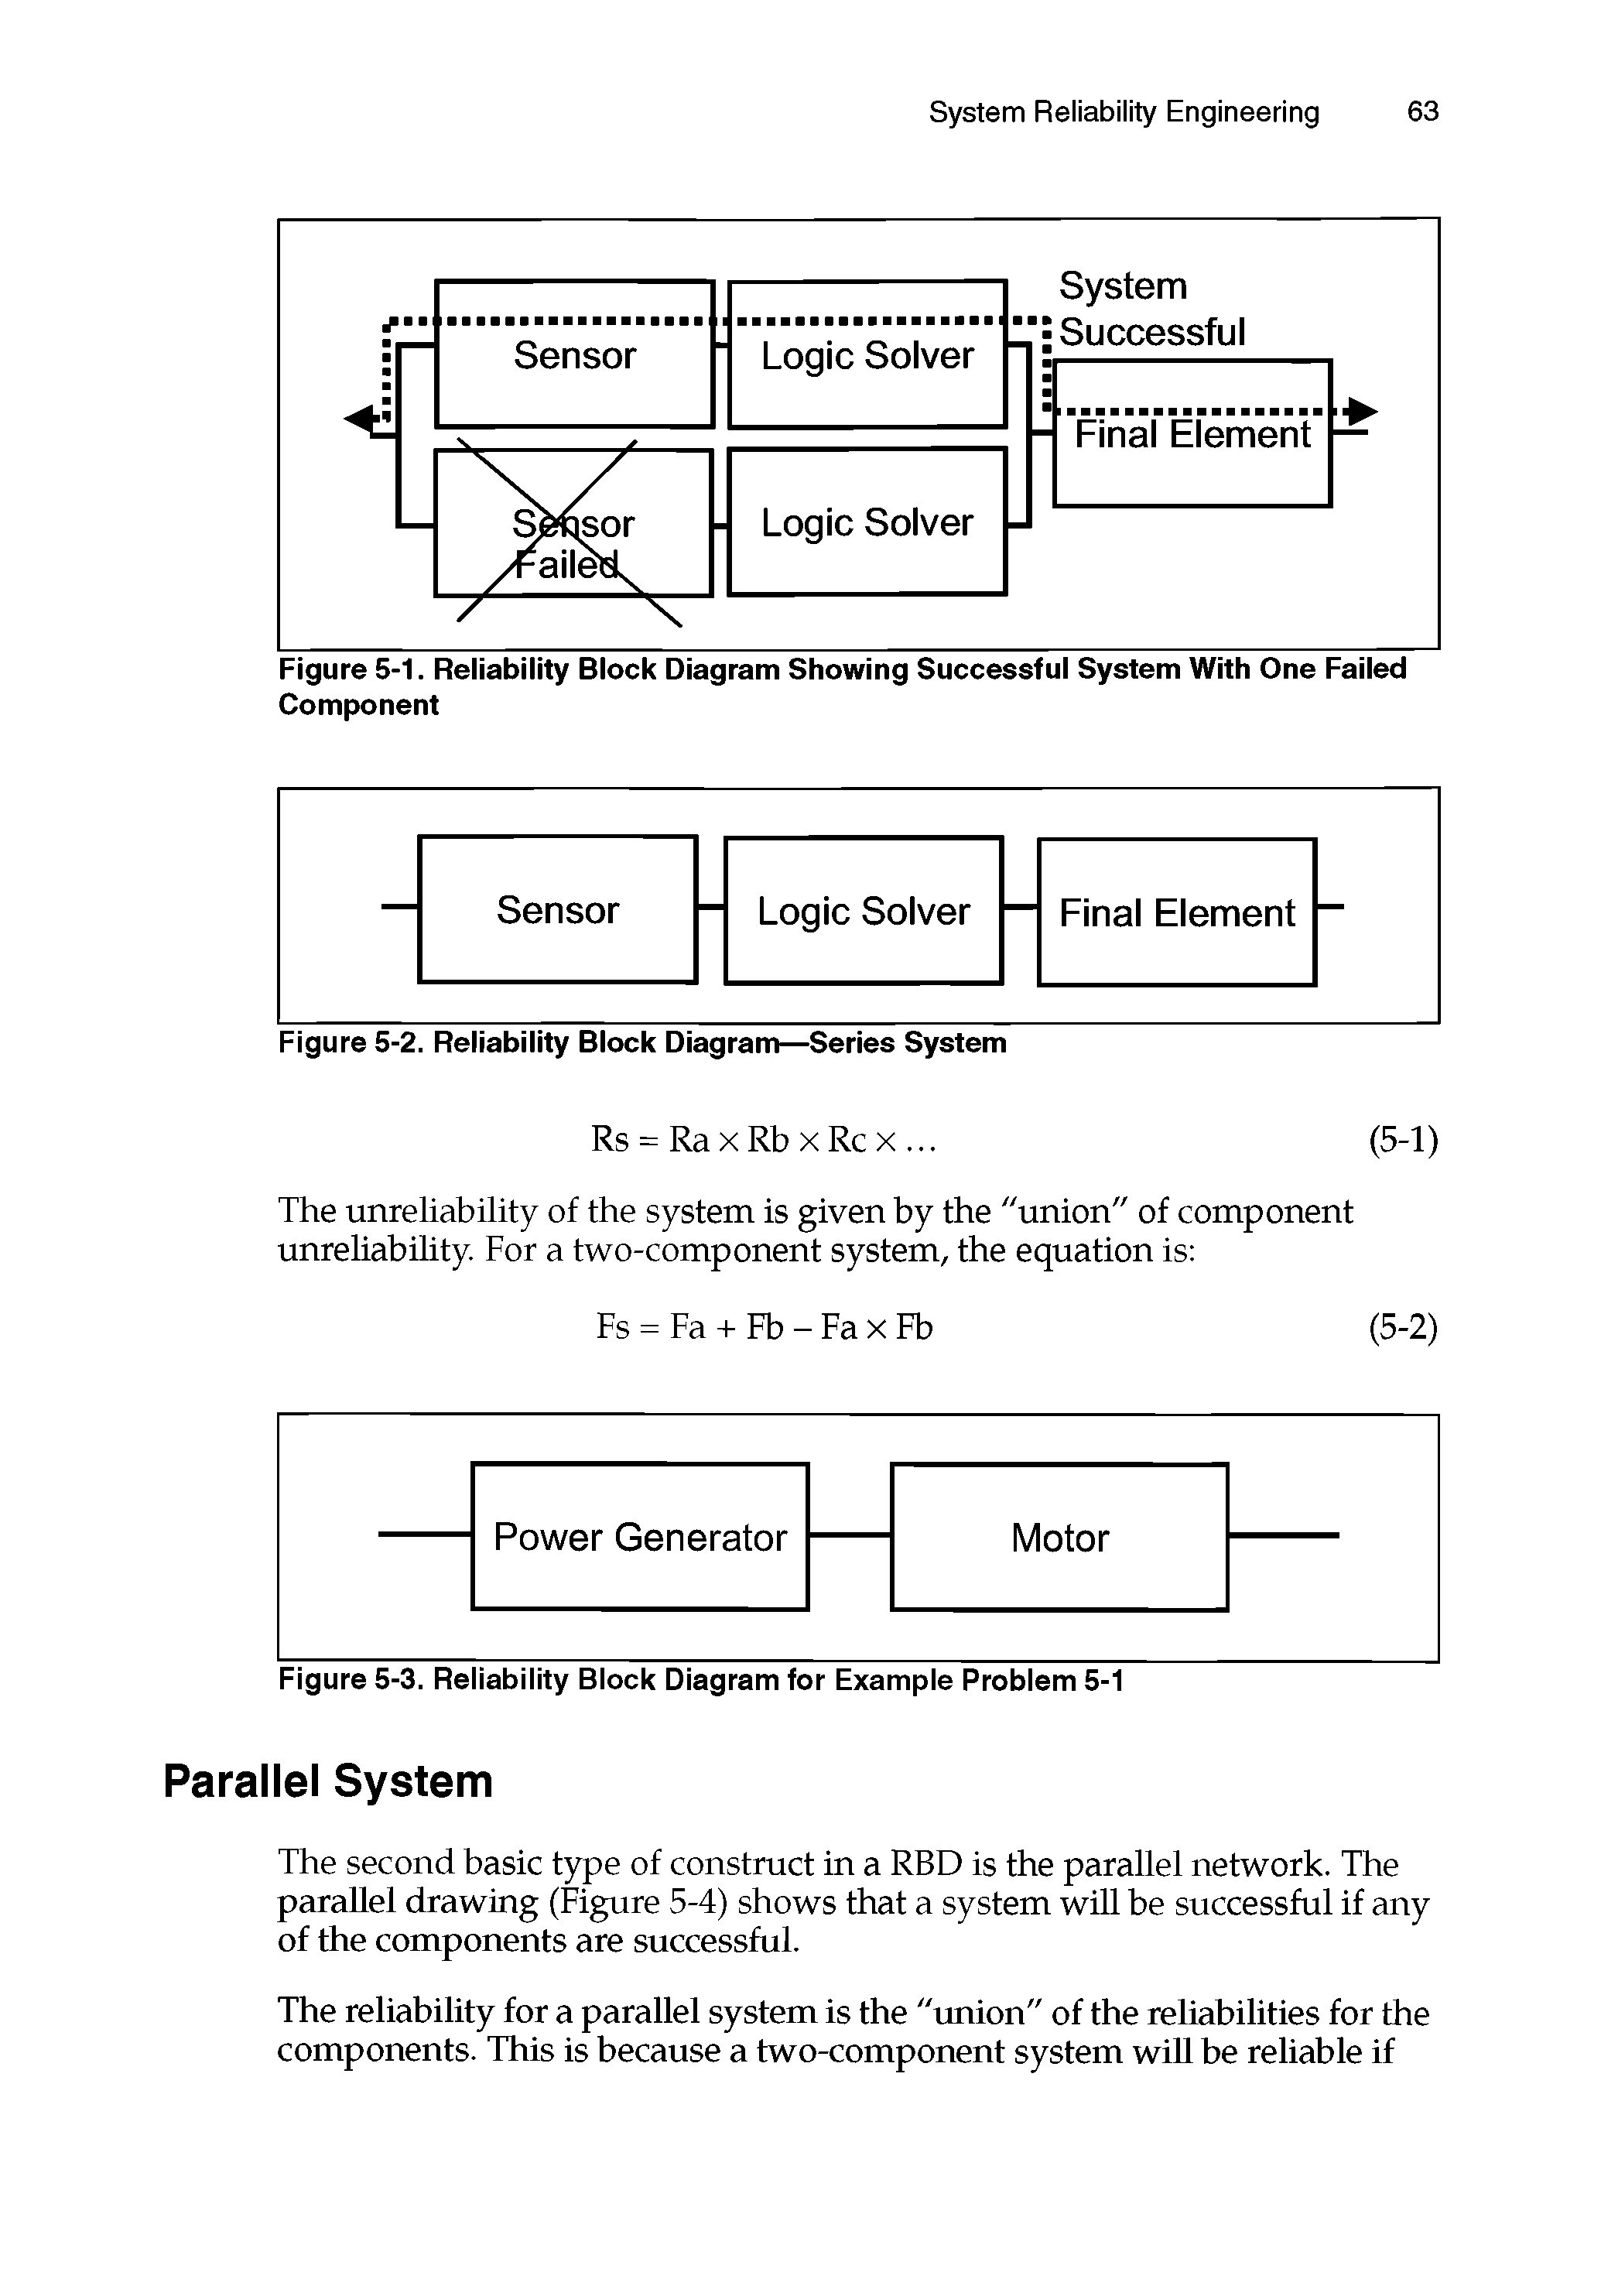 Figure 5-1. Reliability Block Diagram Showing Successful System With One Failed Component...